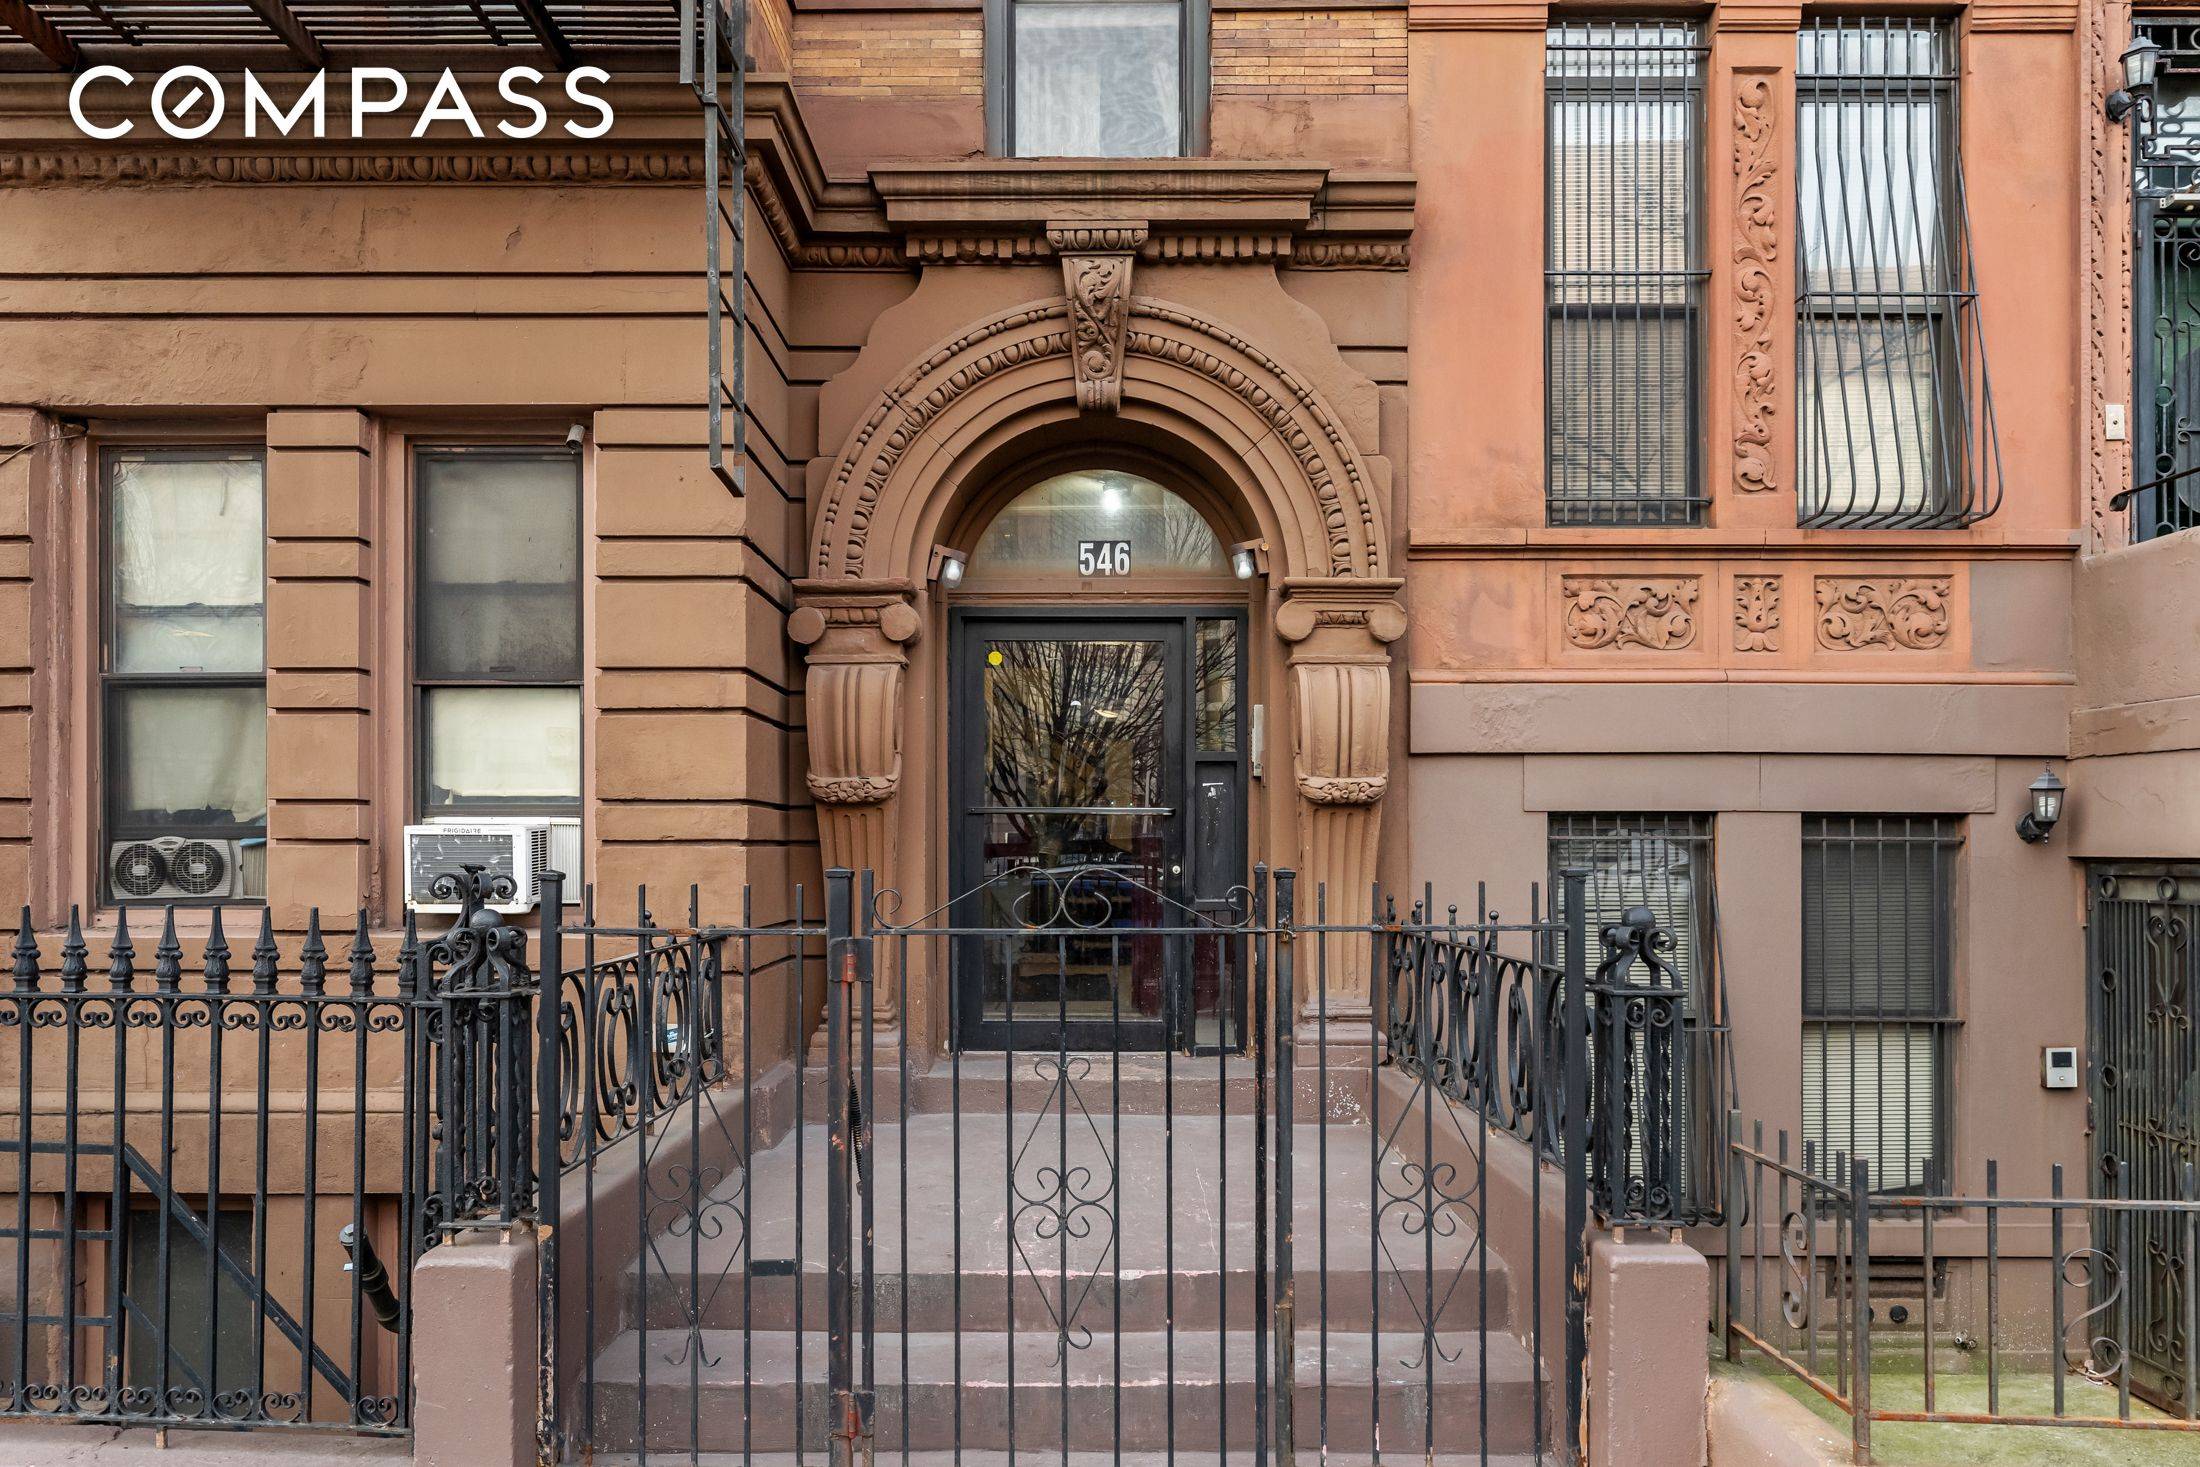 Welcome to 546 West 165th Street, a well maintained 5 unit multi family brownstone nestled in the heart of Washington Heights.